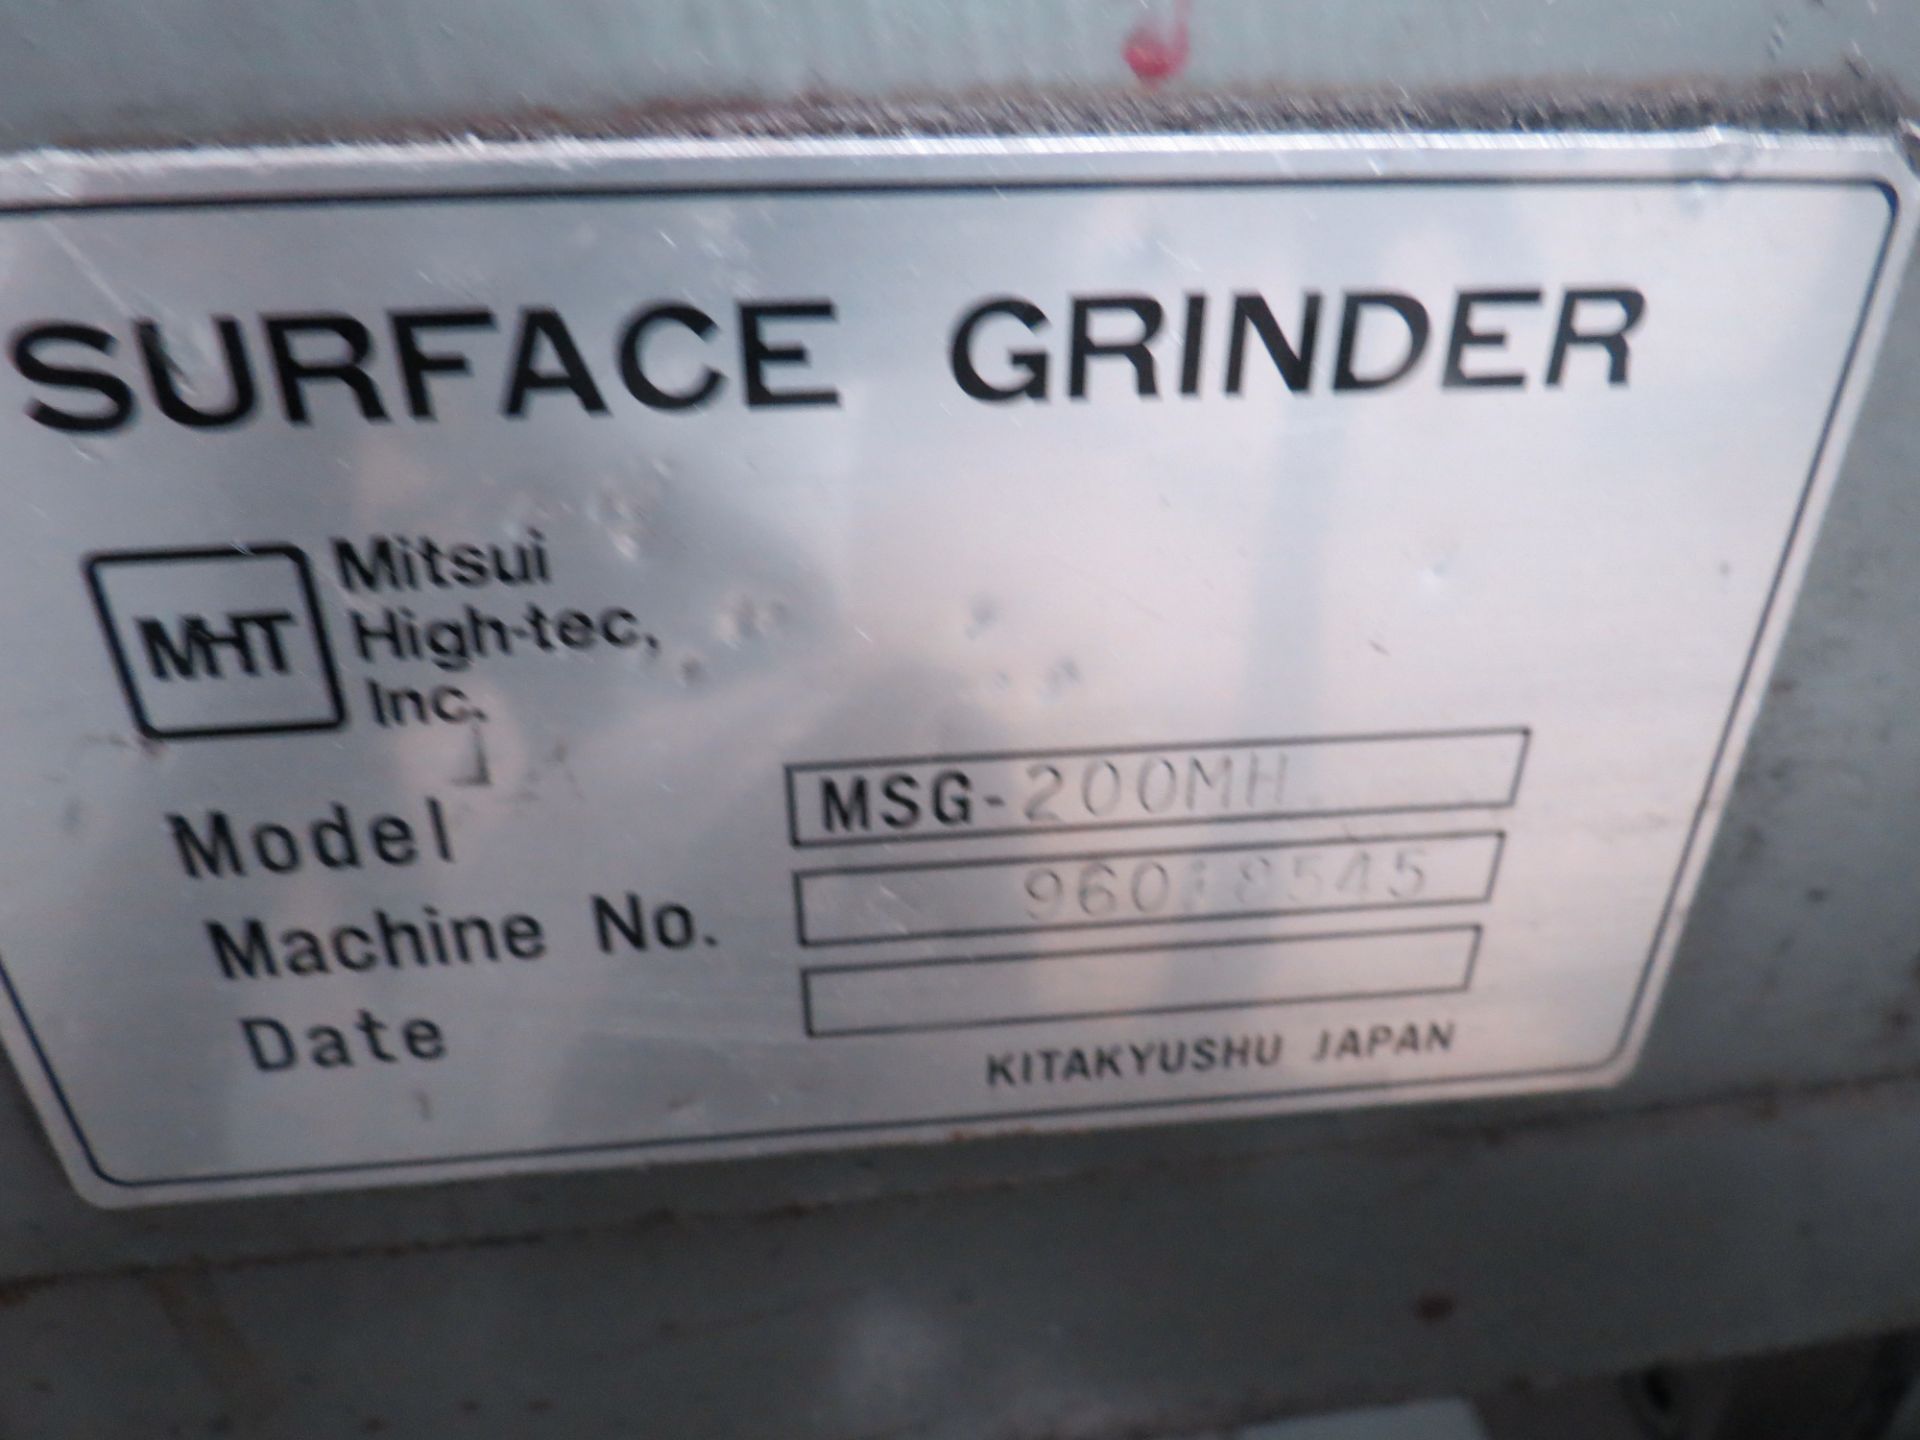 Mitsui High-tec Grinder, MSG-200MH, Serial 96018545 - Image 4 of 6